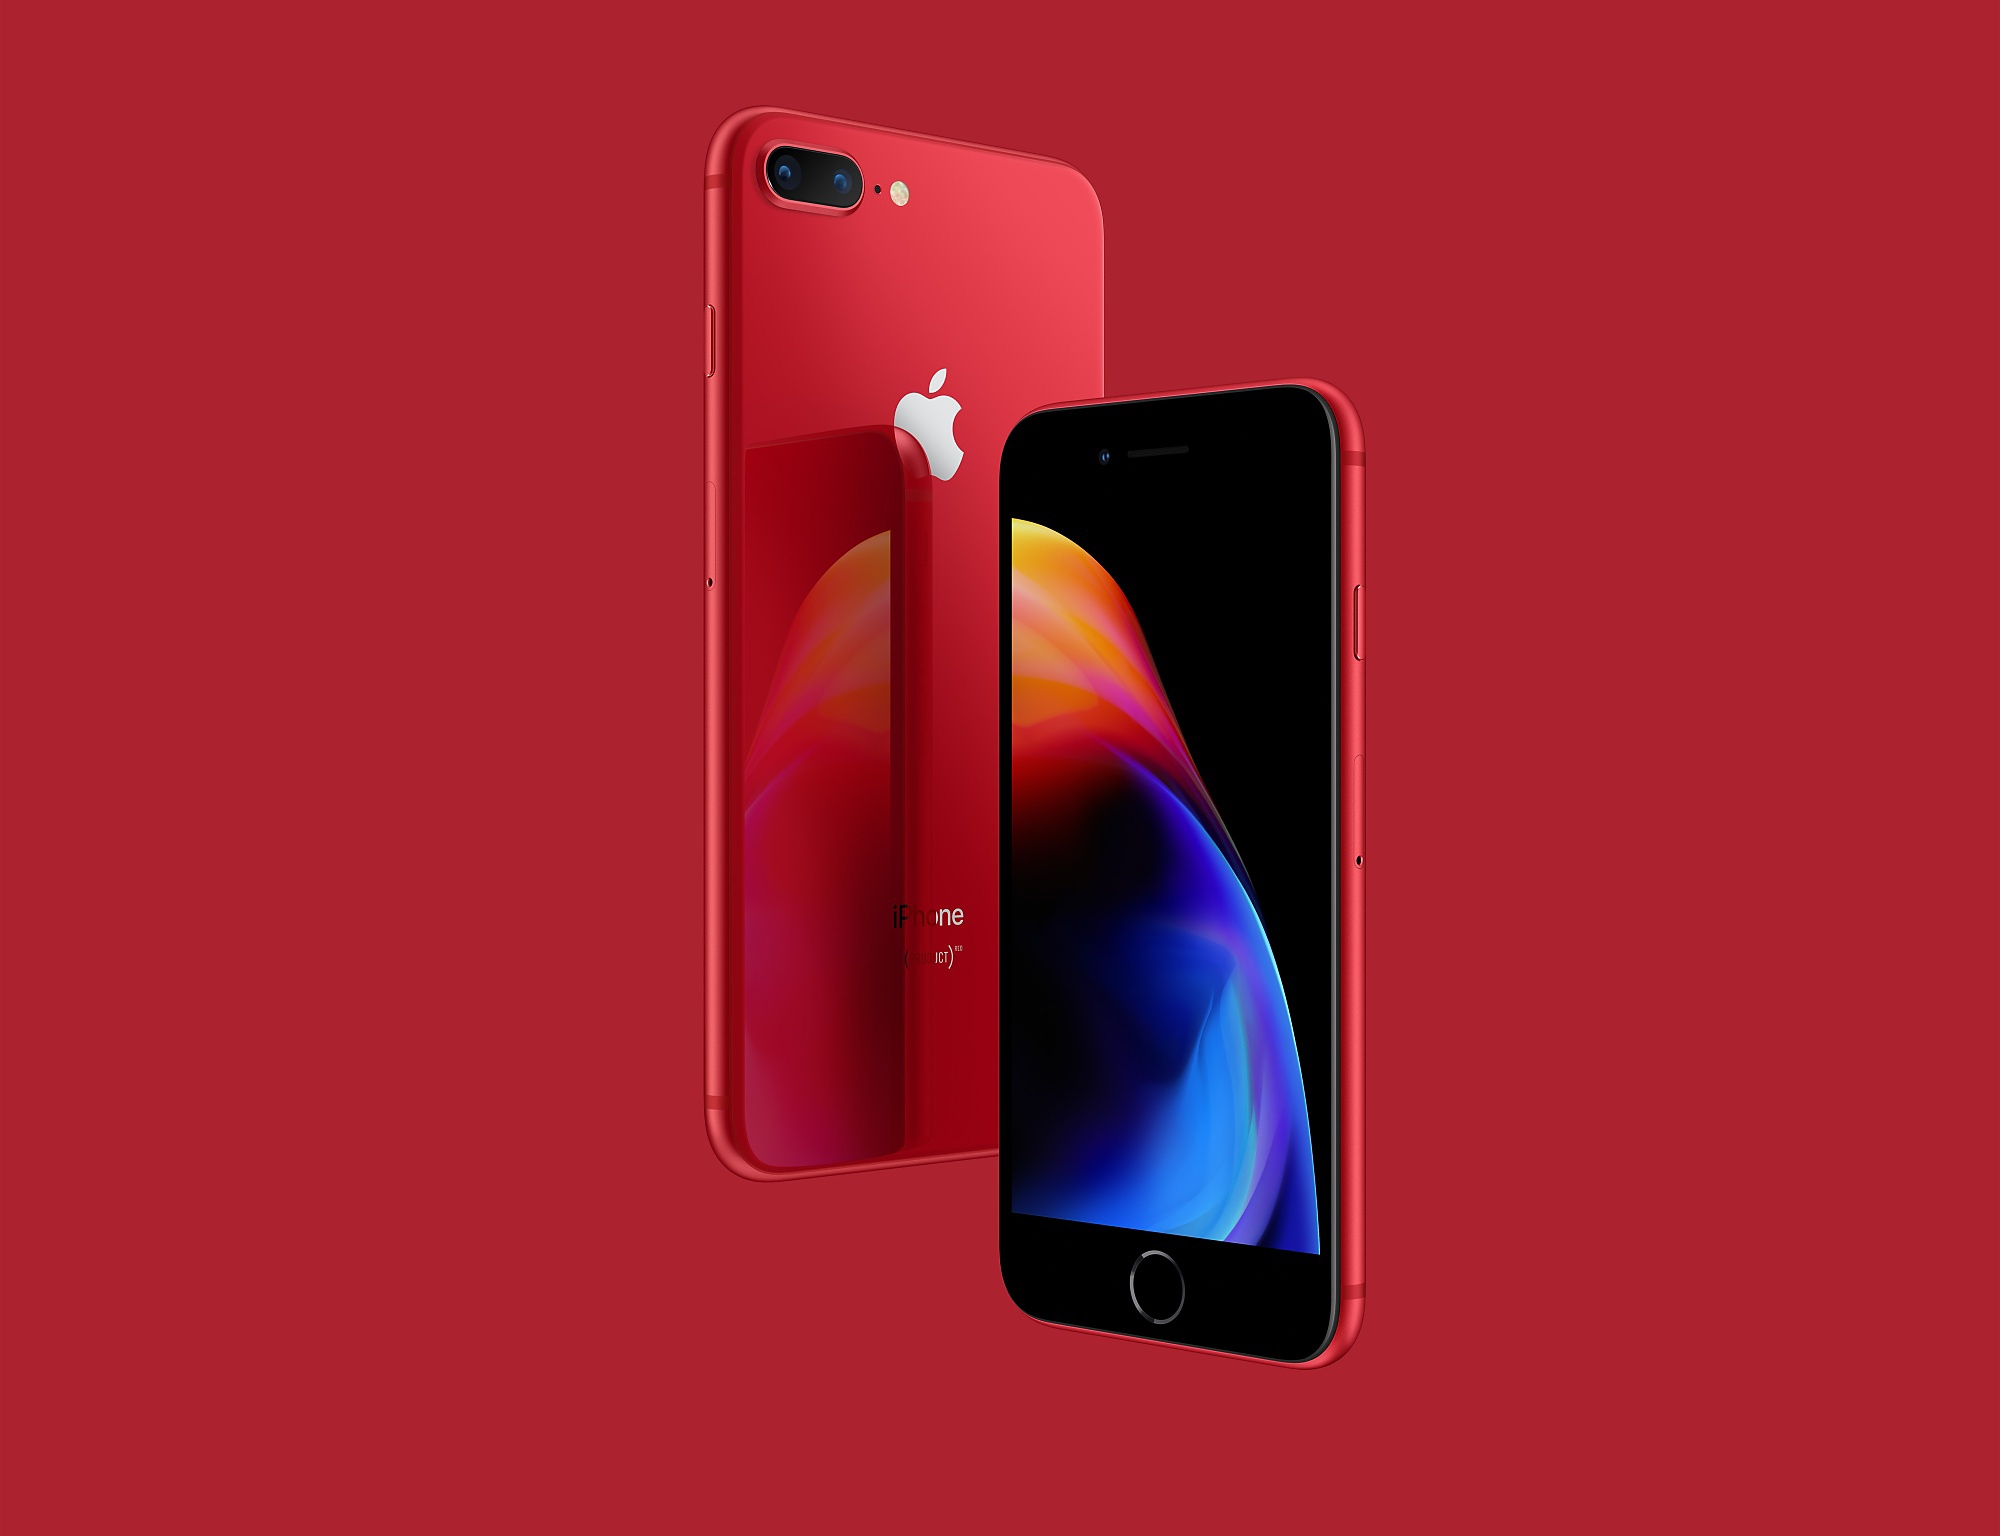 iPhone 8 Plus 256GB (PRODUCT)RED Sprint - Apple